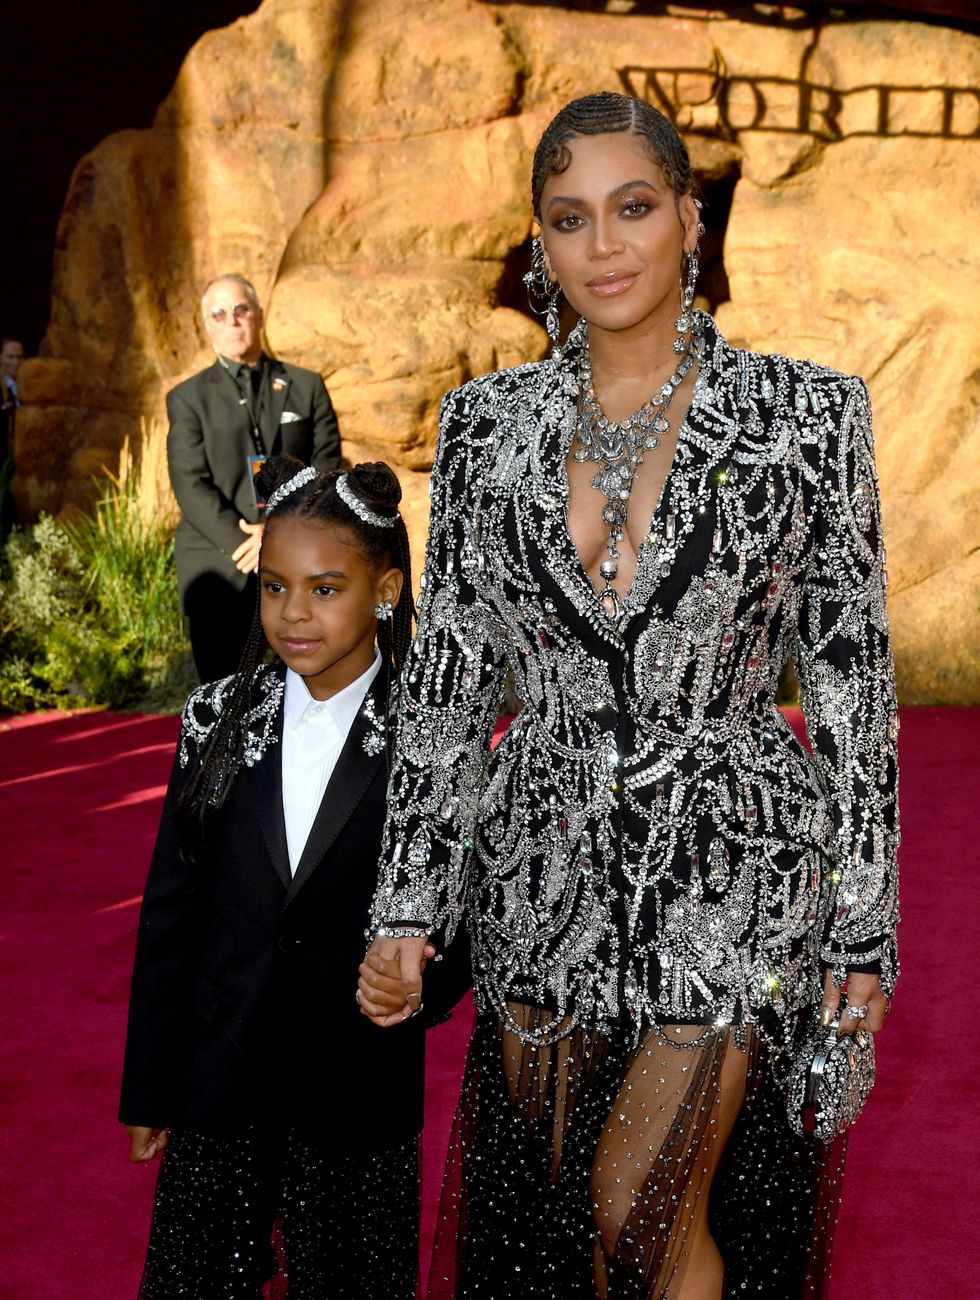 beyoncé and blue ivy at the ﻿lion king ﻿premiere in july 2019﻿